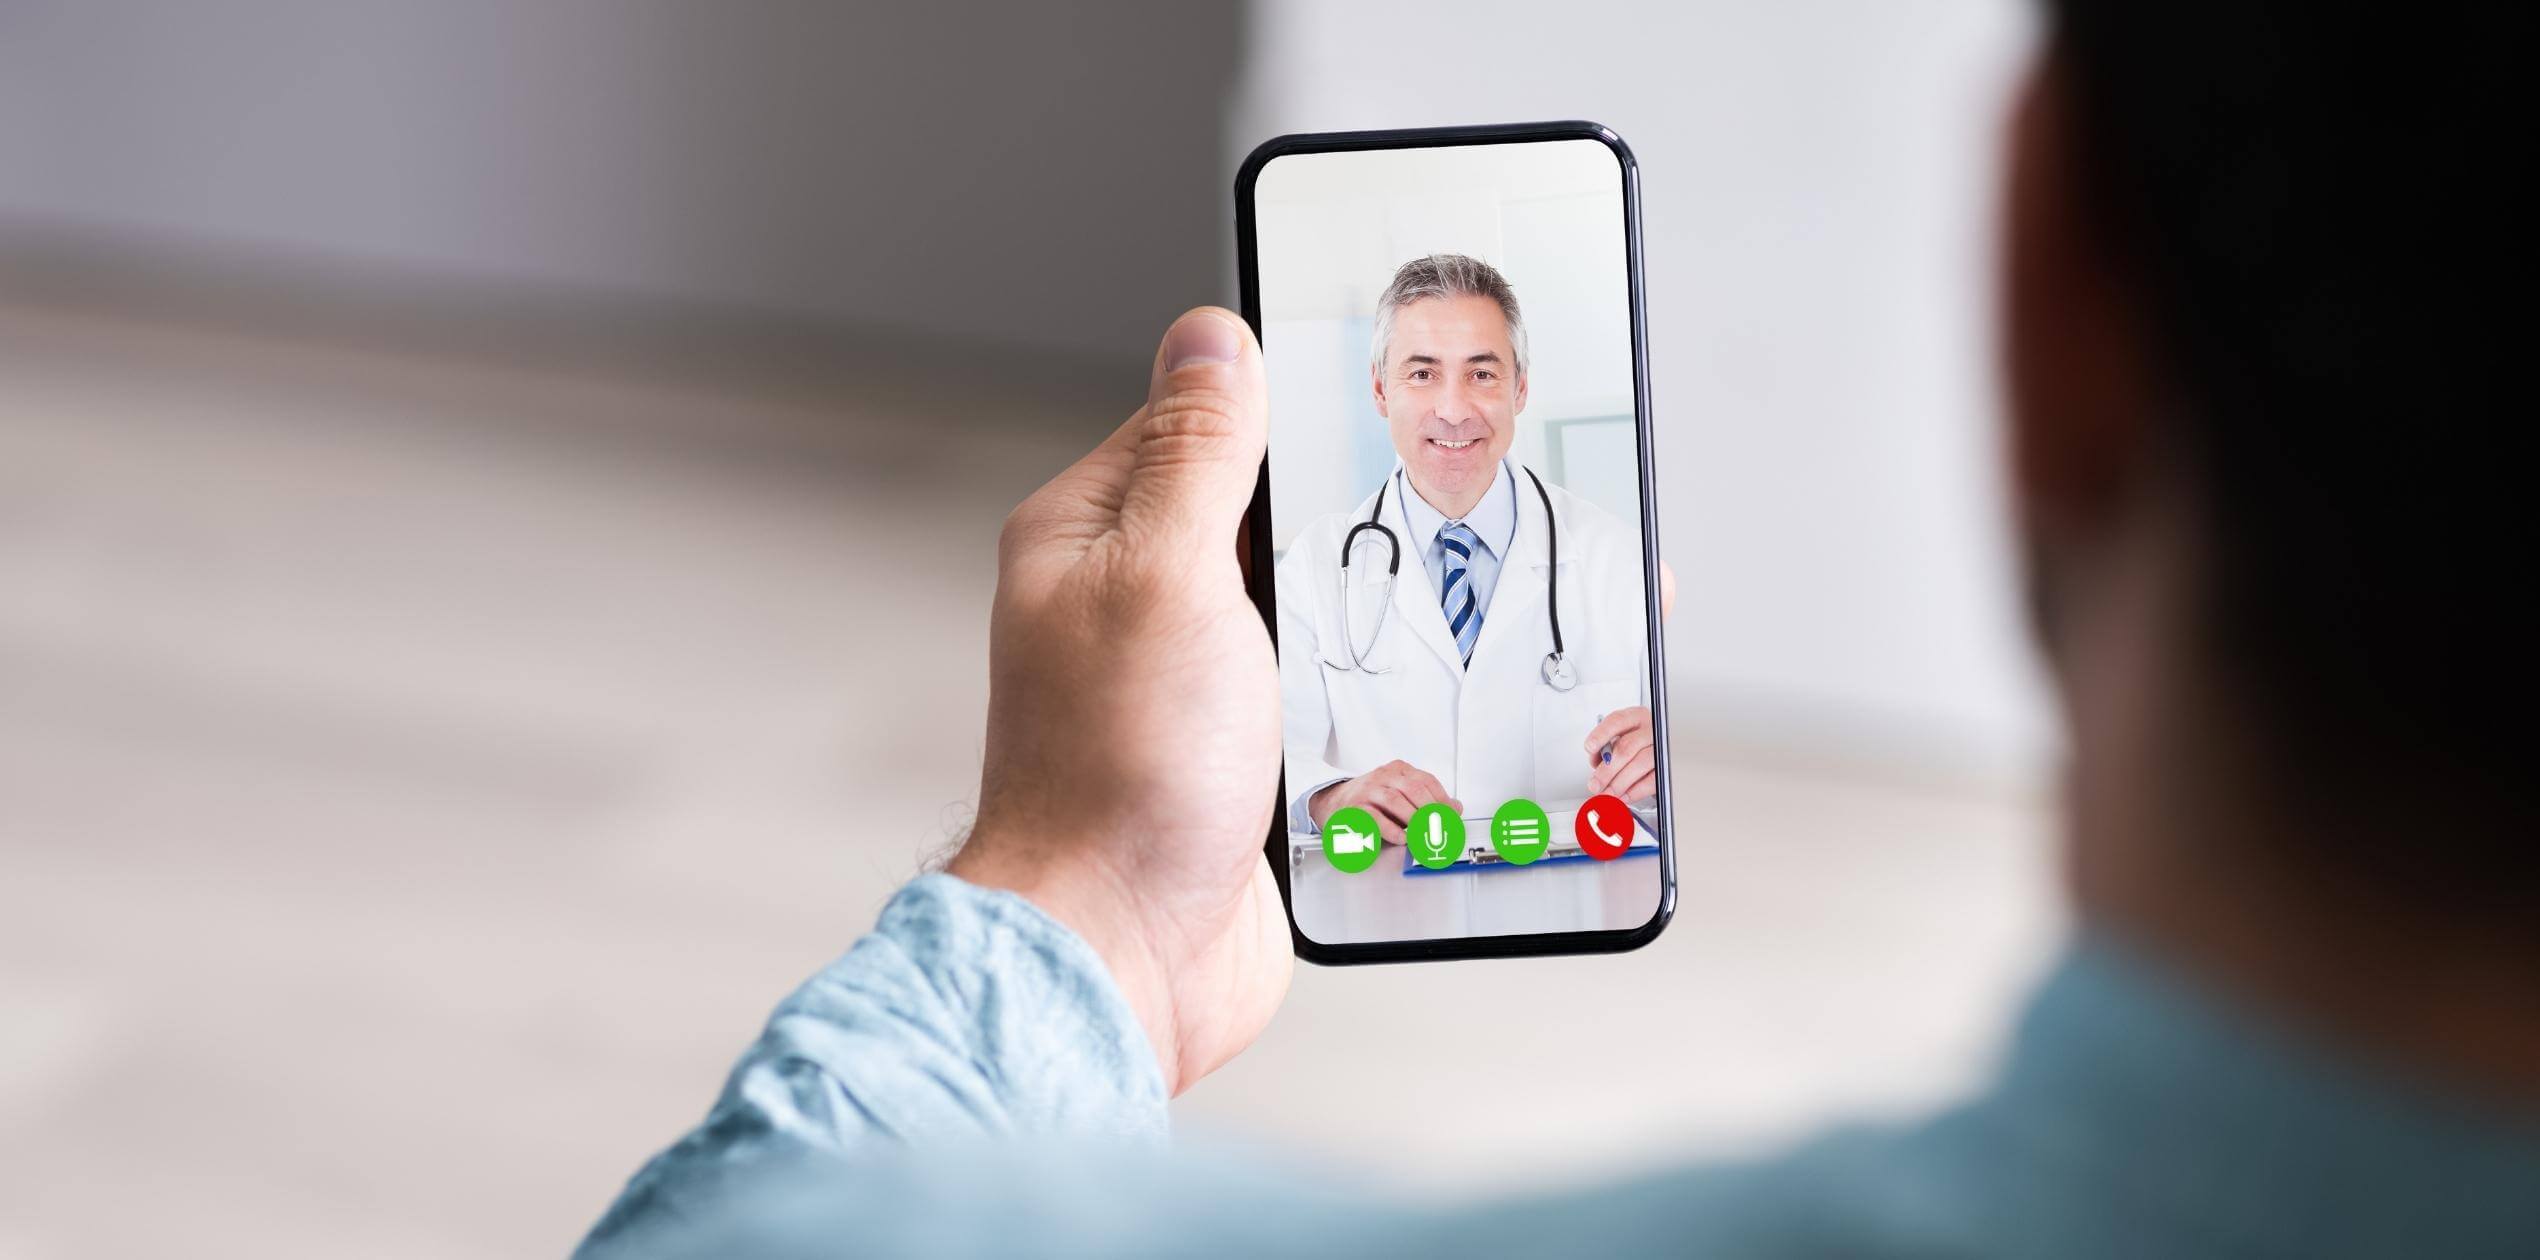 Telehealth & Medicare: 4 Things Providers Should Know